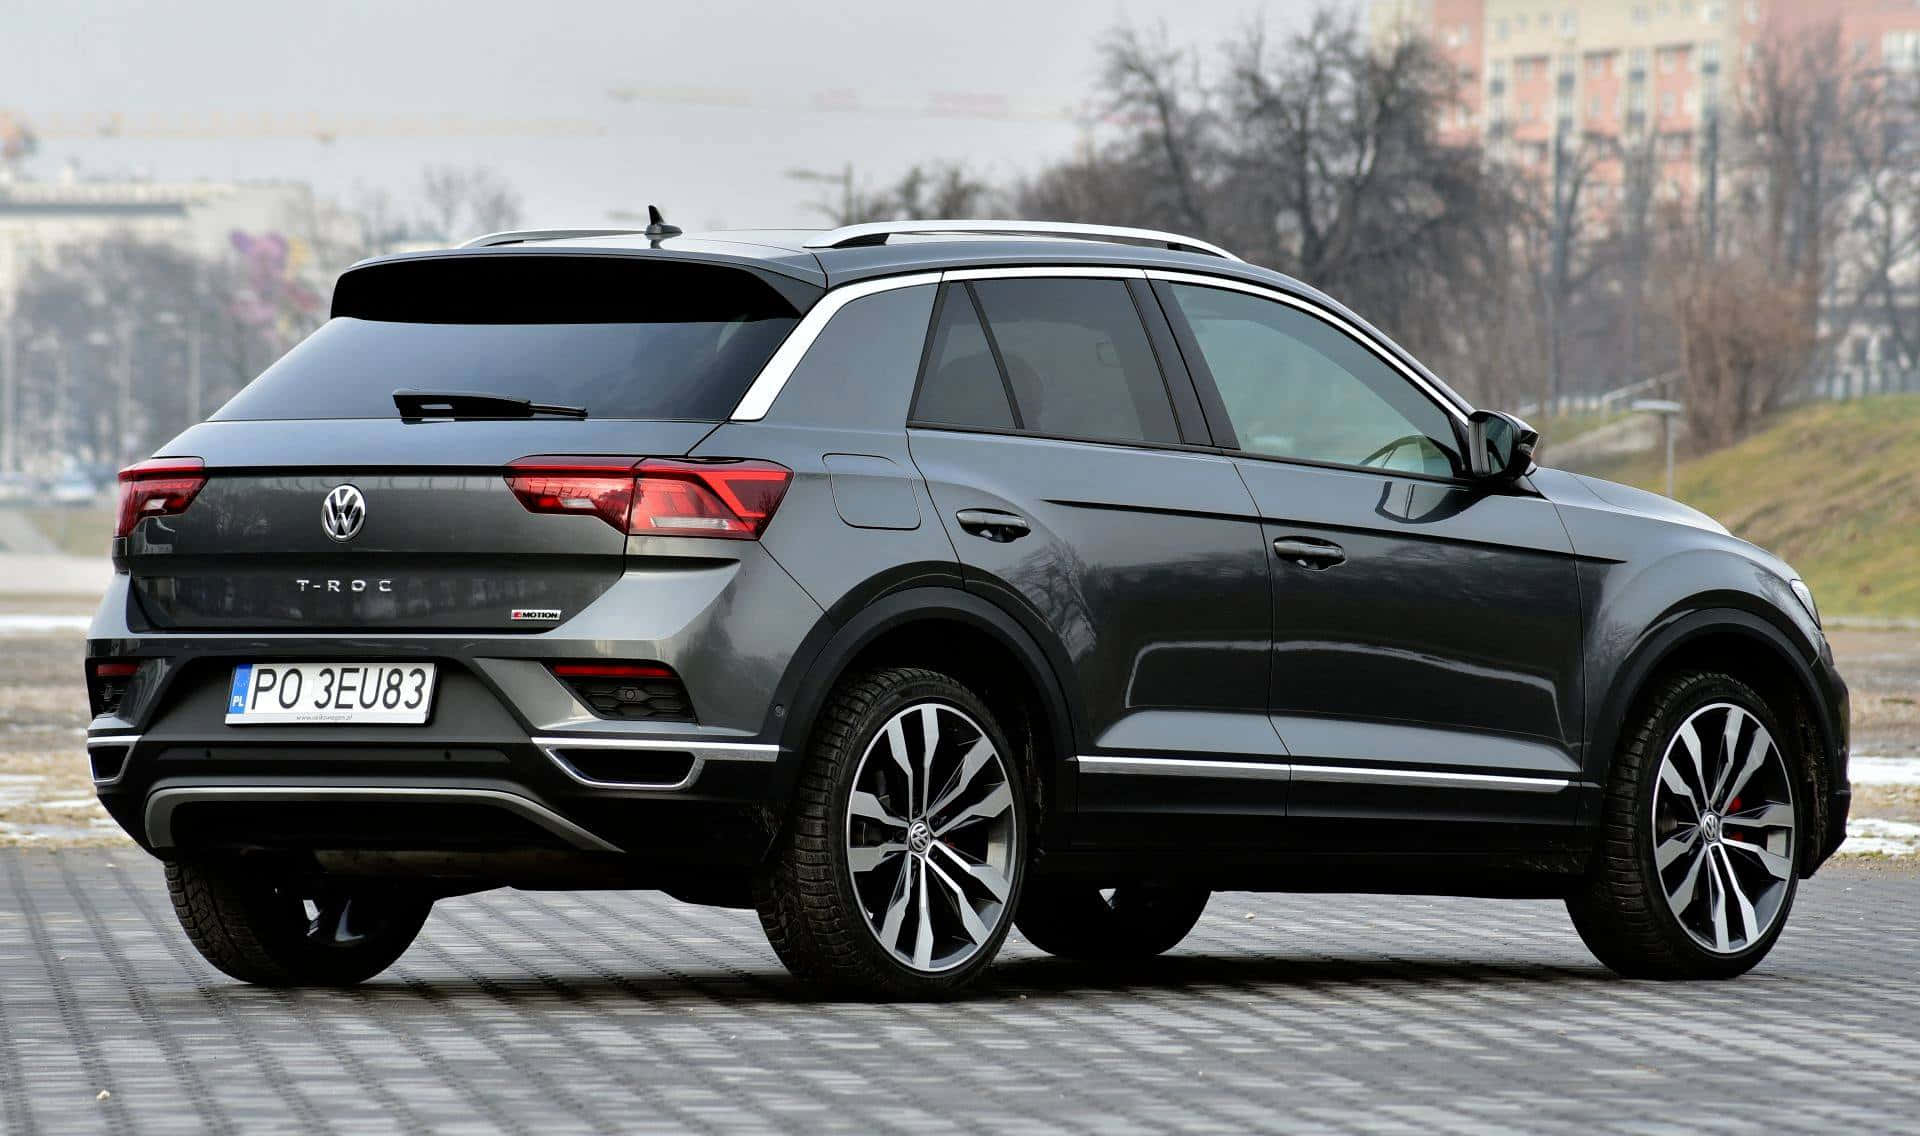 Download Sophisticated Style And Power - Volkswagen T-roc Wallpaper ...